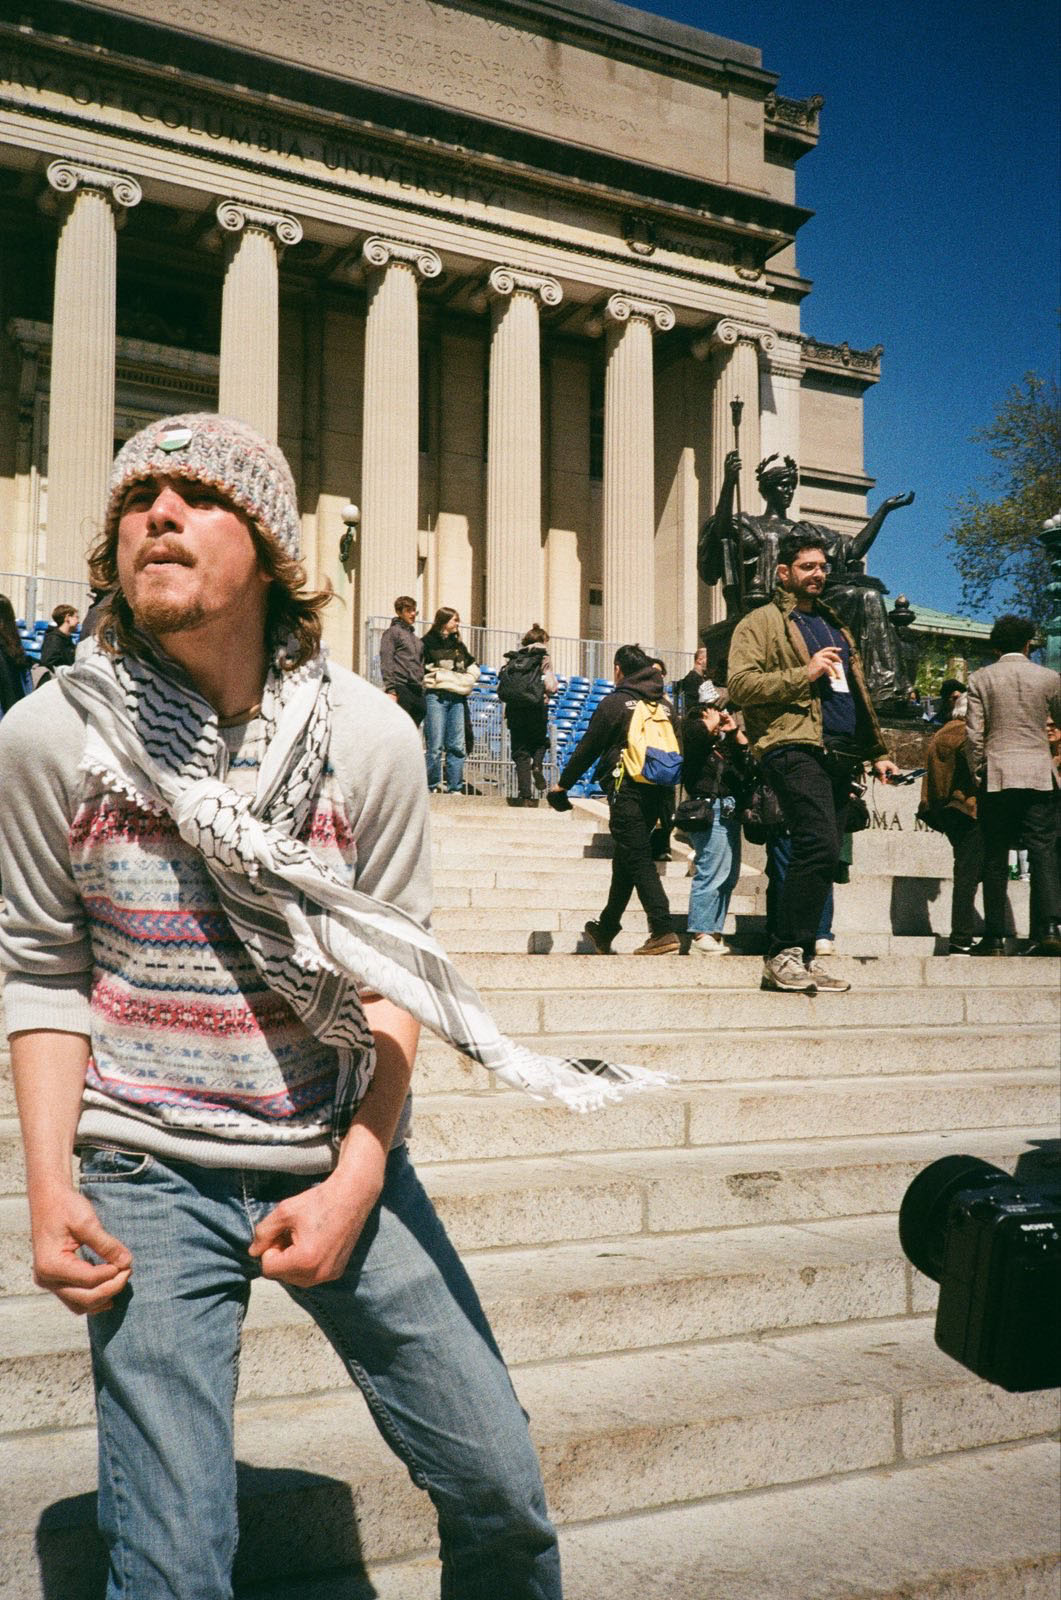 Student activist IAM clay, who would later be arrested from inside the occupied Hamilton Hall, is pictured at a faculty walkout on Columbia’s campus.